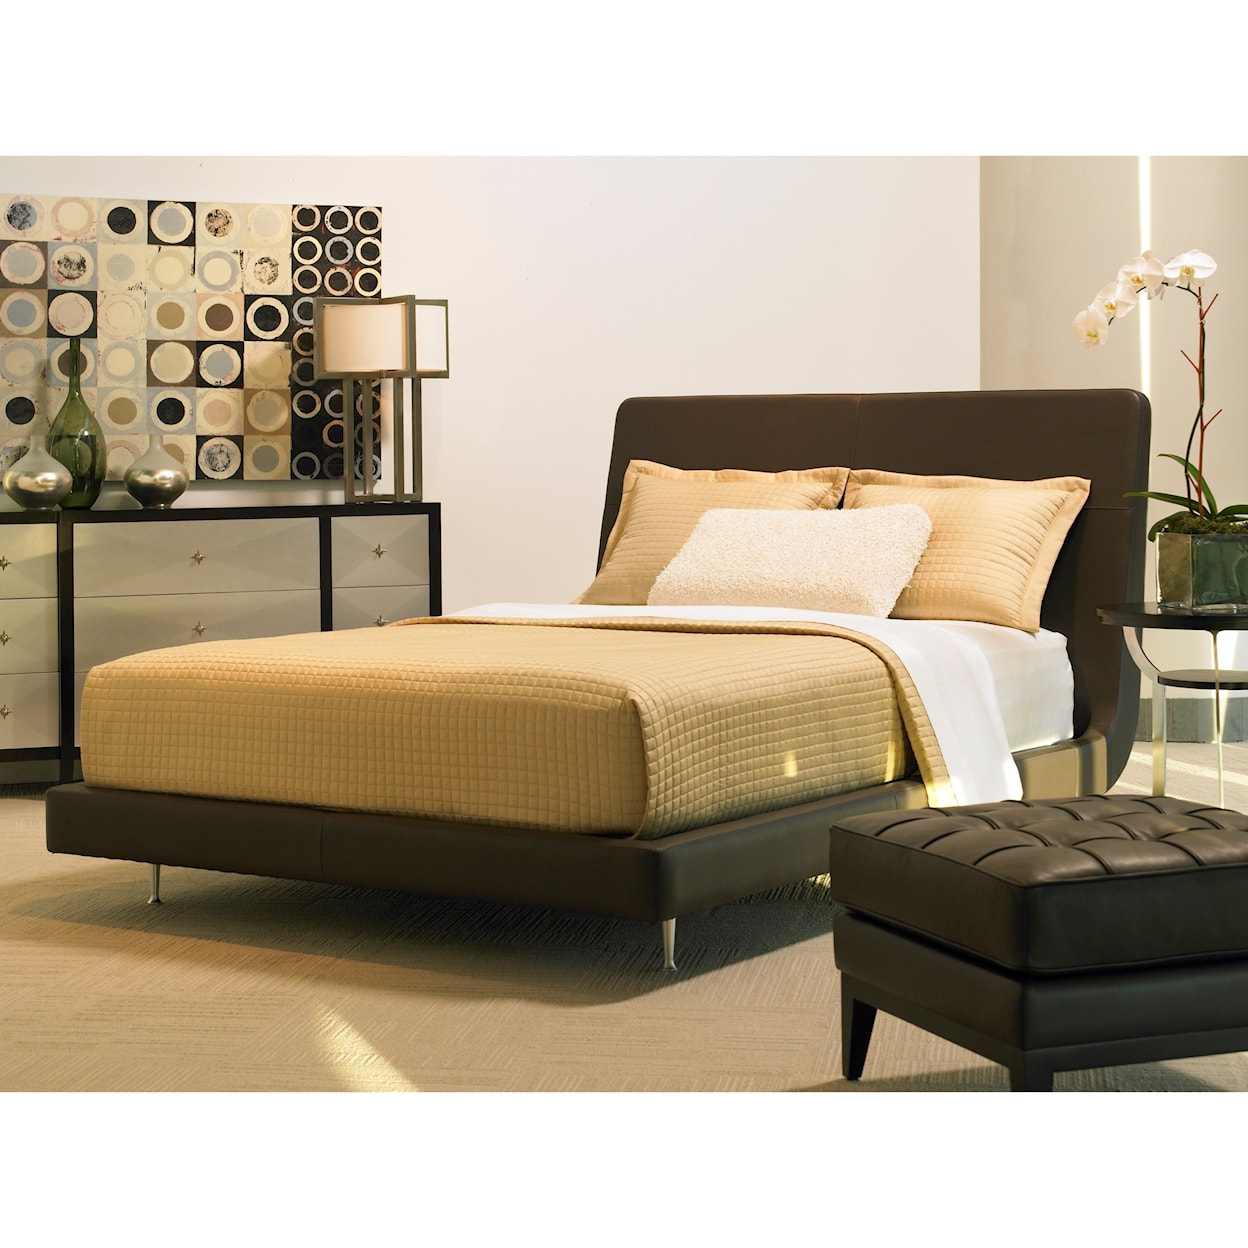 American Leather Menlo Park Bed California King Upholstered Bed